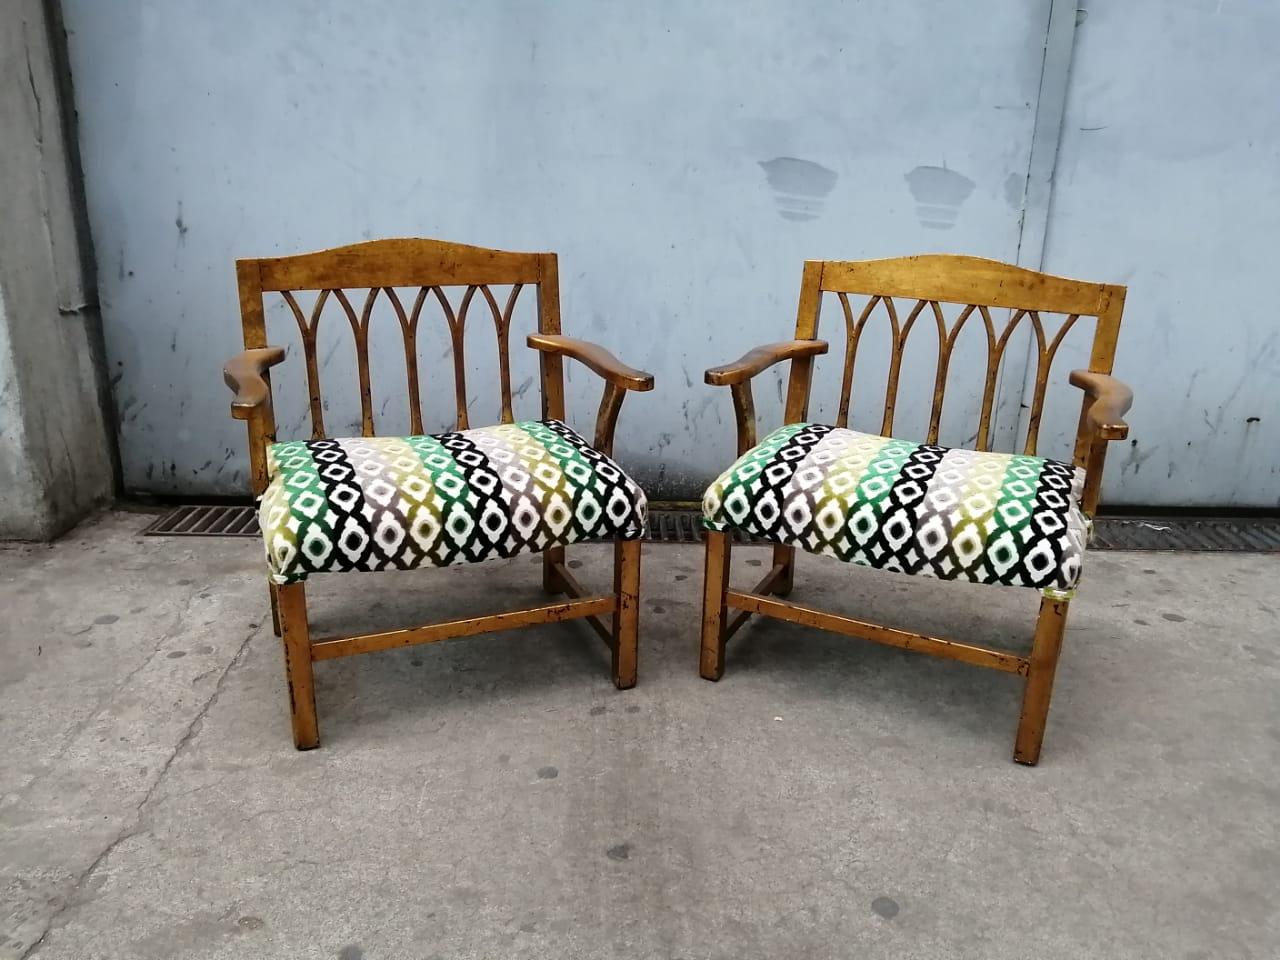 A pair of lovely Mexican Mid-Century Modern gilded wood children's armchairs. The armchairs backs show ogival arches. The seats are upholstered with a geometric design fabric.